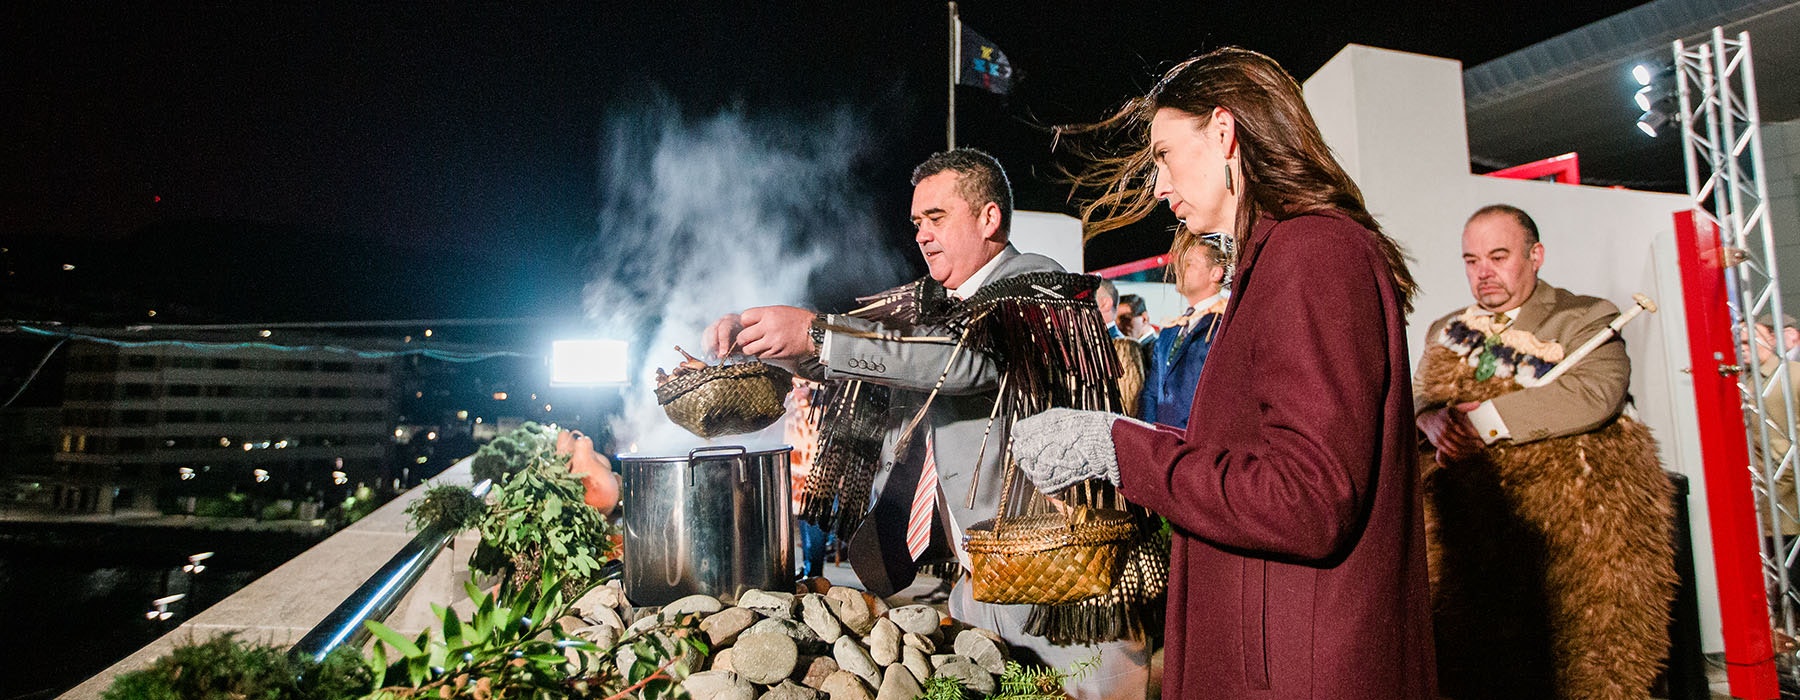 Rangi Matamua lifts the lid from the food pot to release steam into the sky, with then-Prime Minister Jacinda Ardern looking on